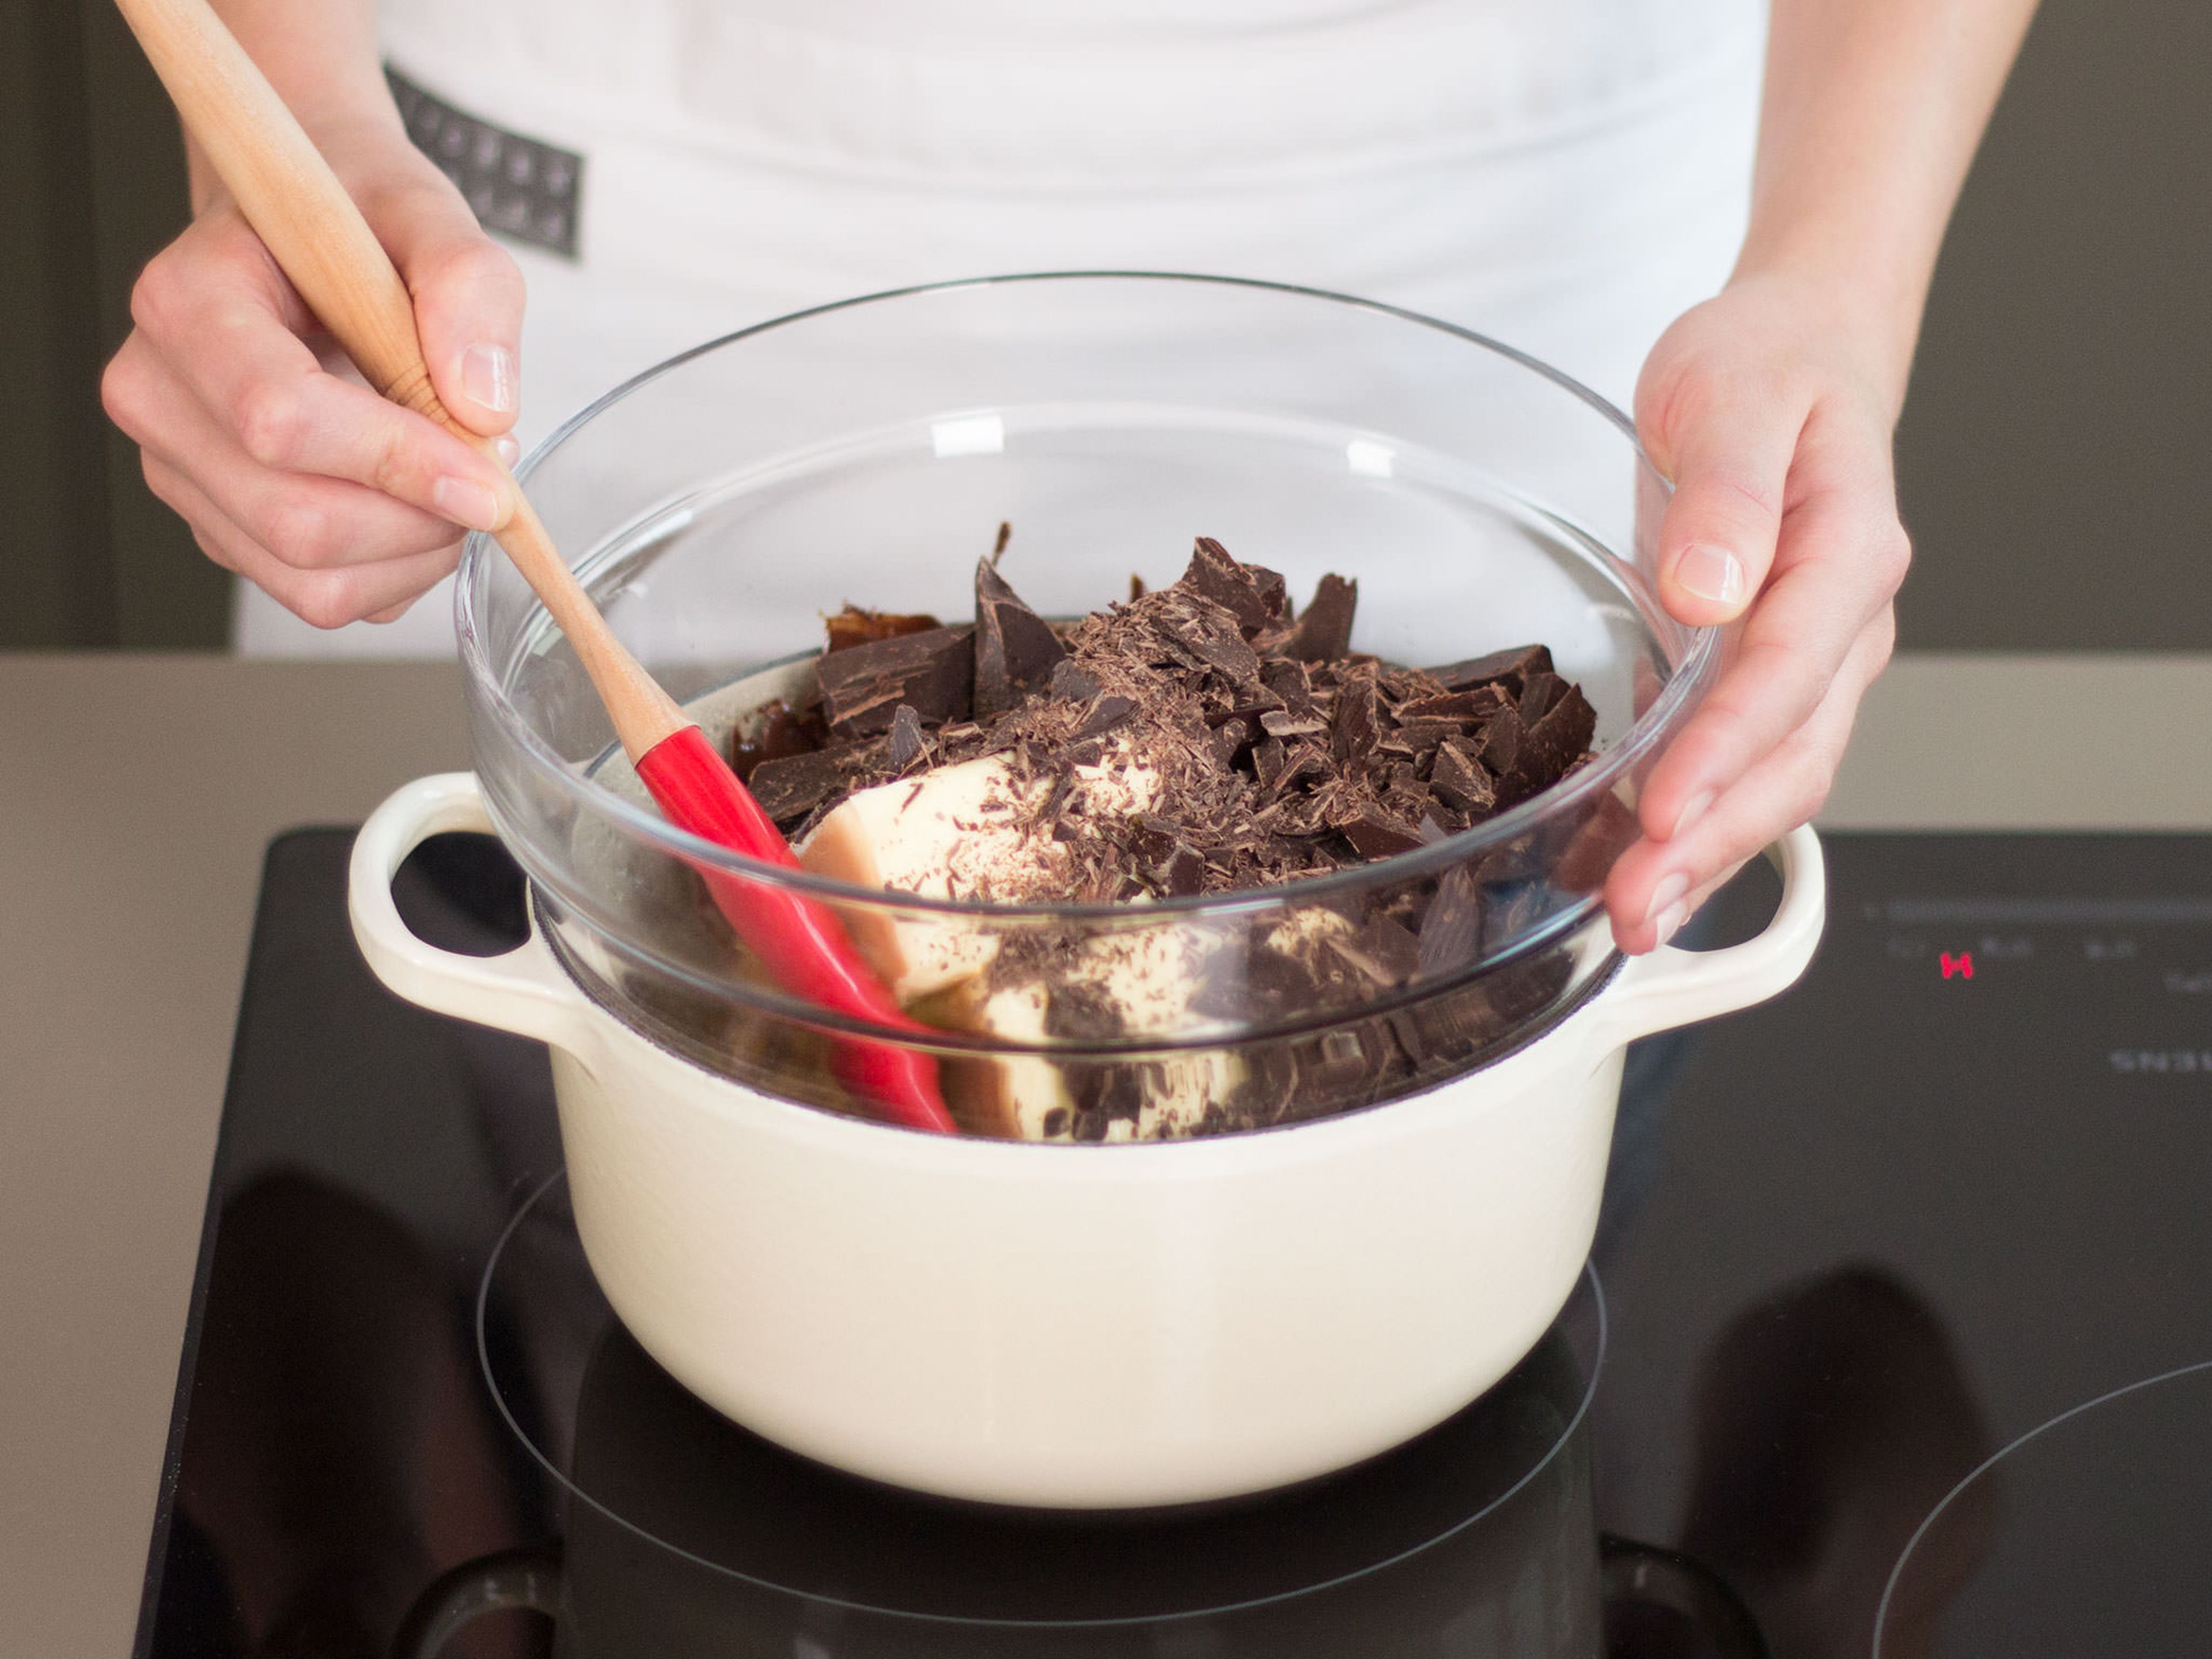 Preheat oven to 180°C/350°F. Heat a little water in a large saucepan and bring it to a boil at medium-high heat. Reduce heat and place a large bowl on top as a double boiler. Add butter and chocolate to bowl and stir until melted.